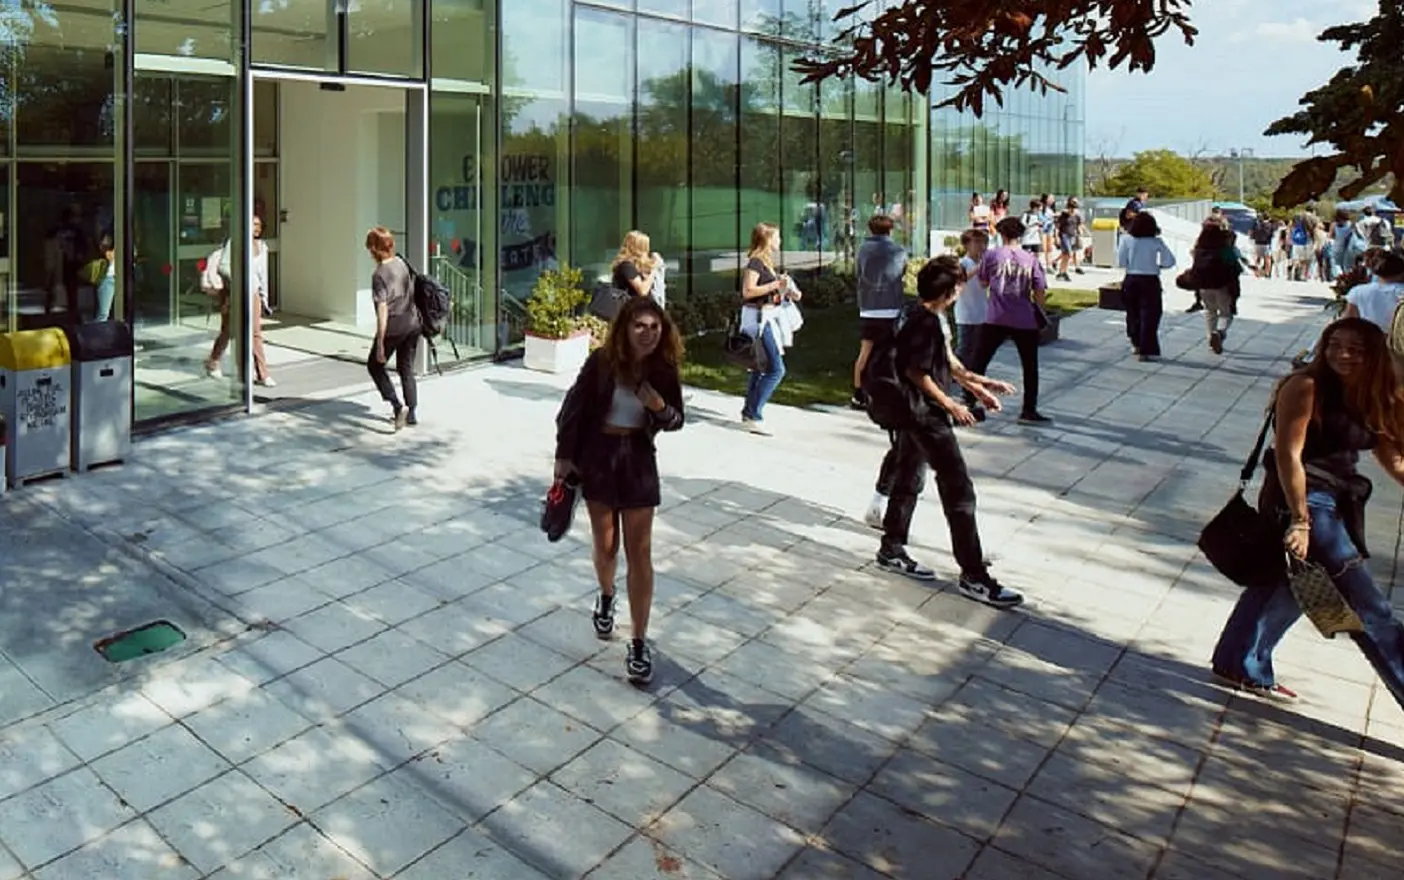 Students leaving campus building.